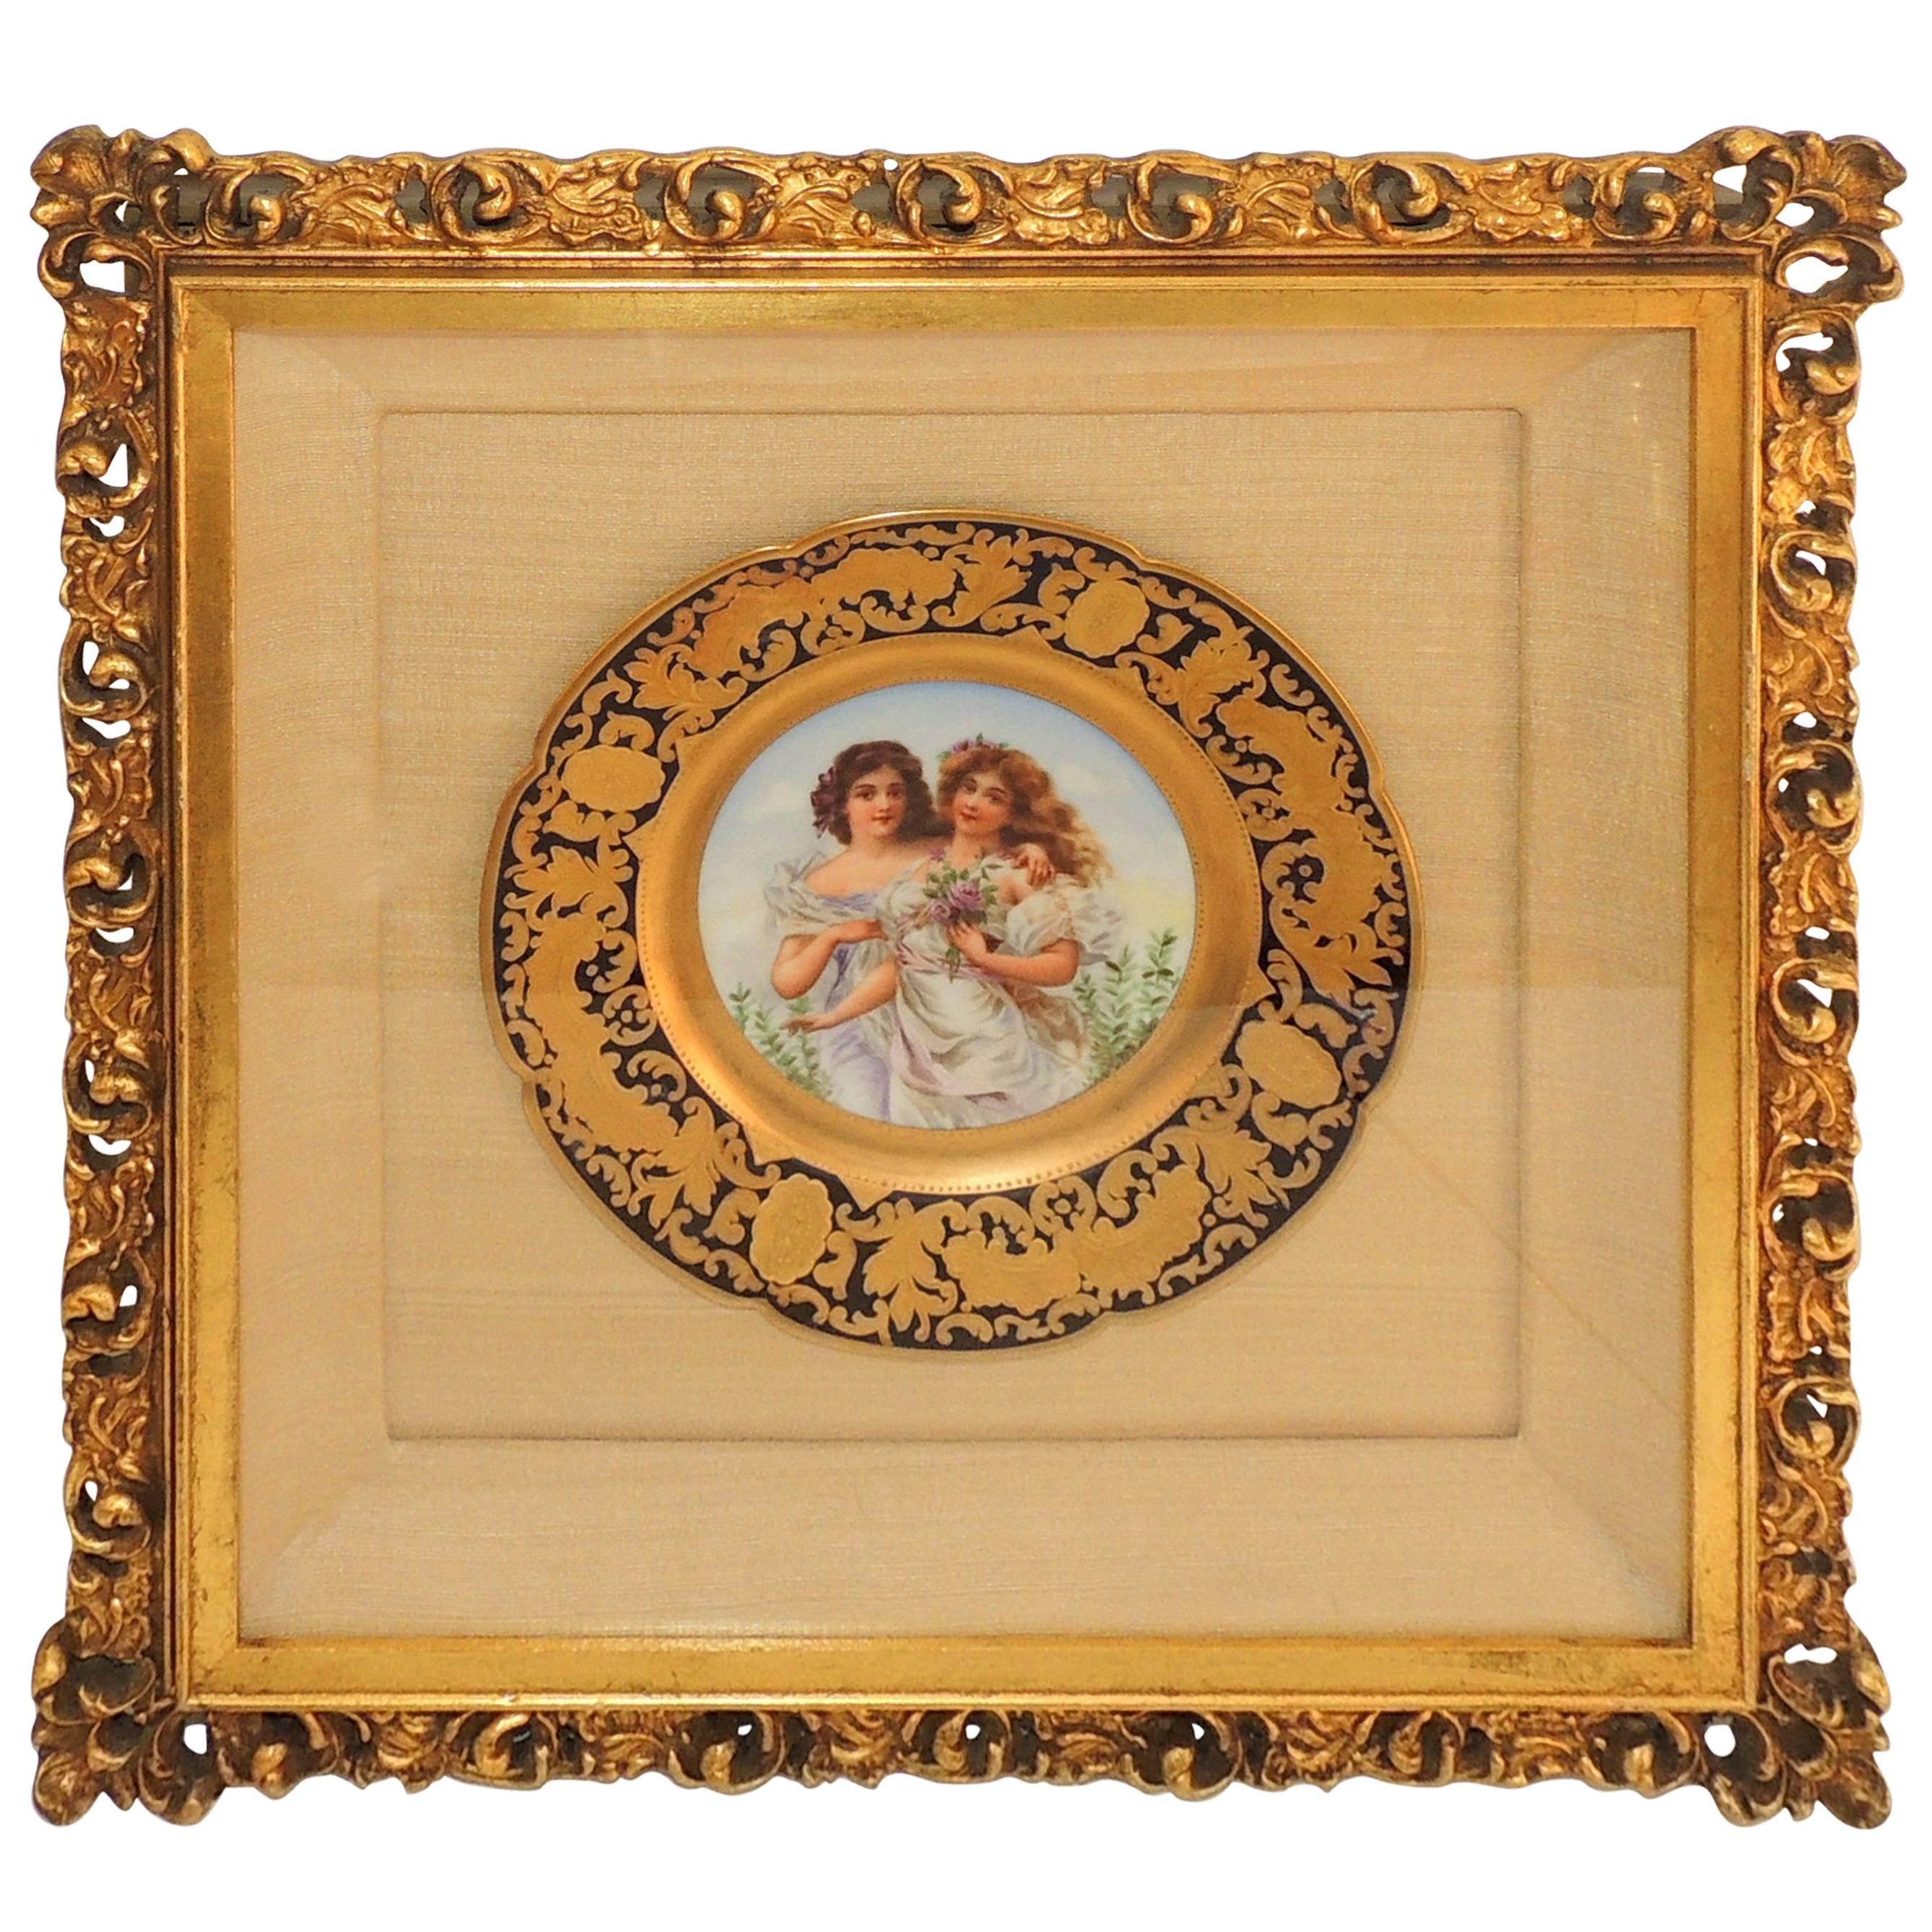 French Hand-Painted Portrait Plate Two Maidens Jules Etienne Rue De Paradis